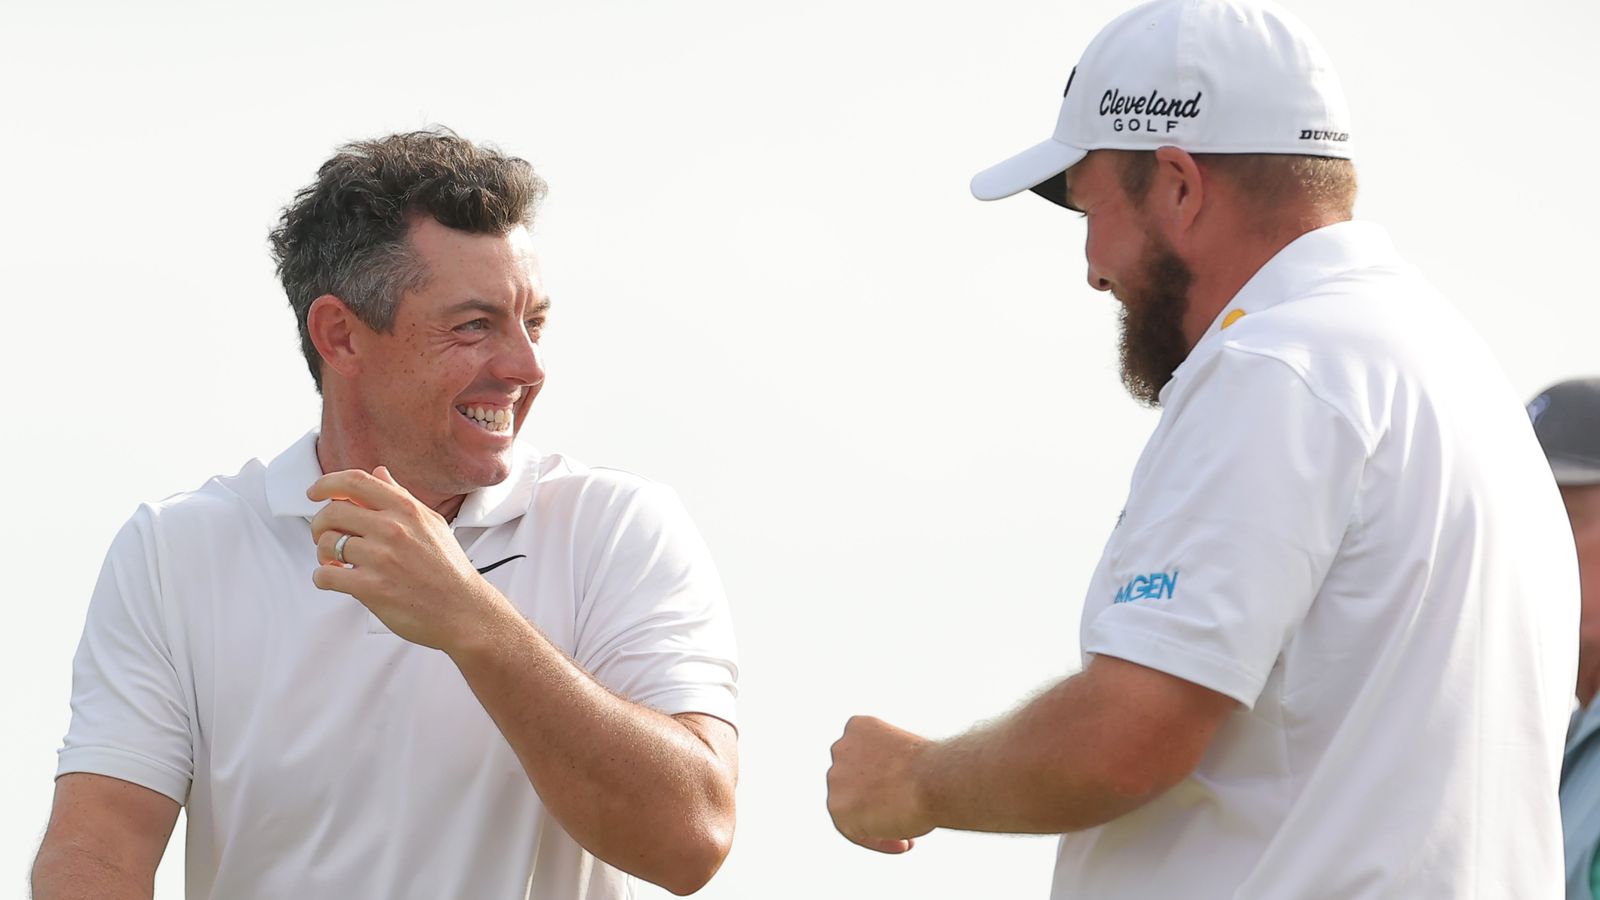 Rory McIlroy and Shane Lowry Win Zurich Classic of New Orleans Team Event